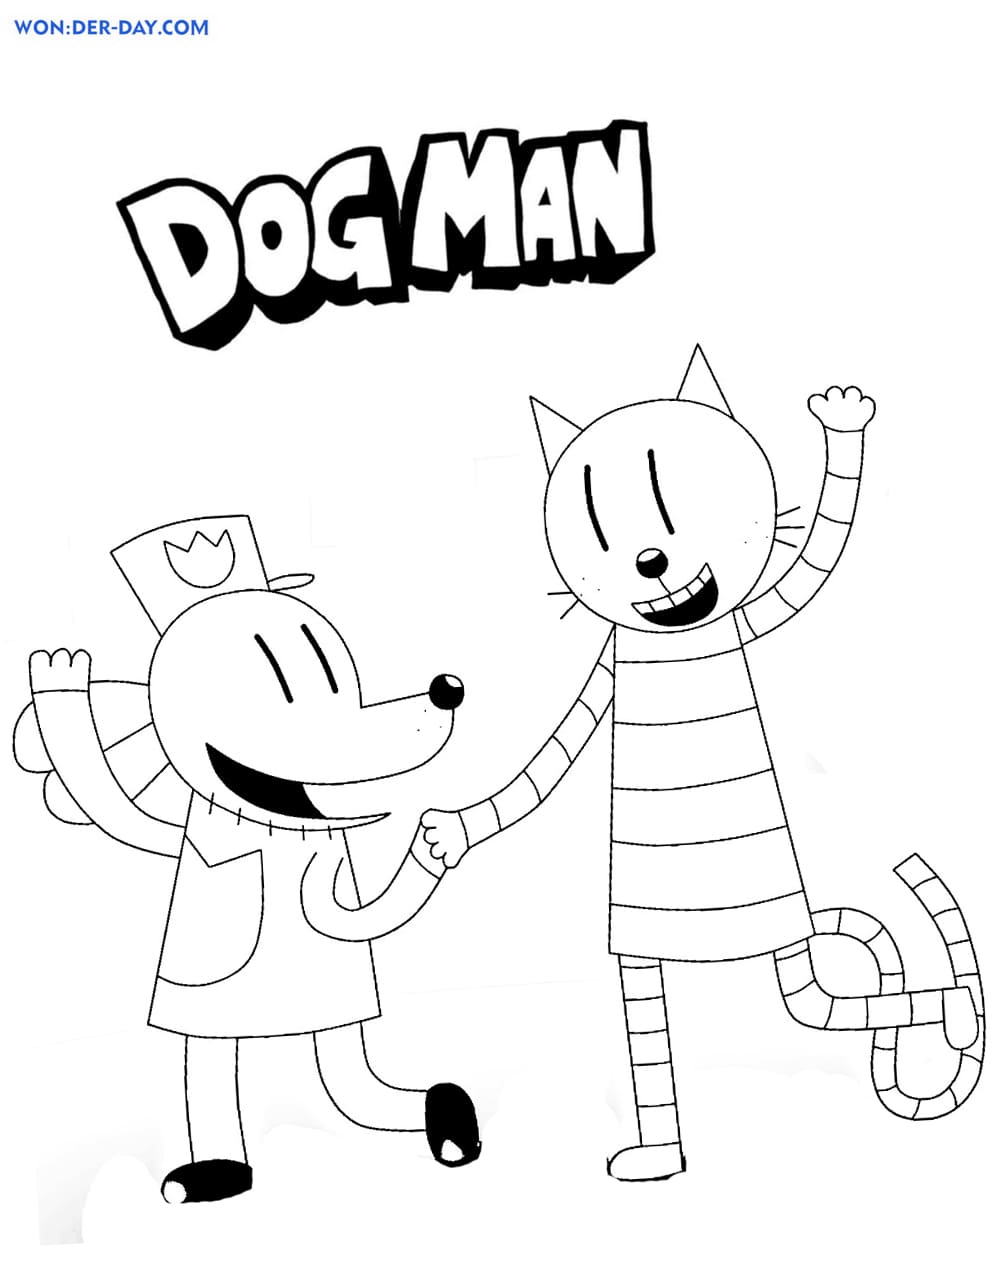 Dog man coloring pages free coloring pages